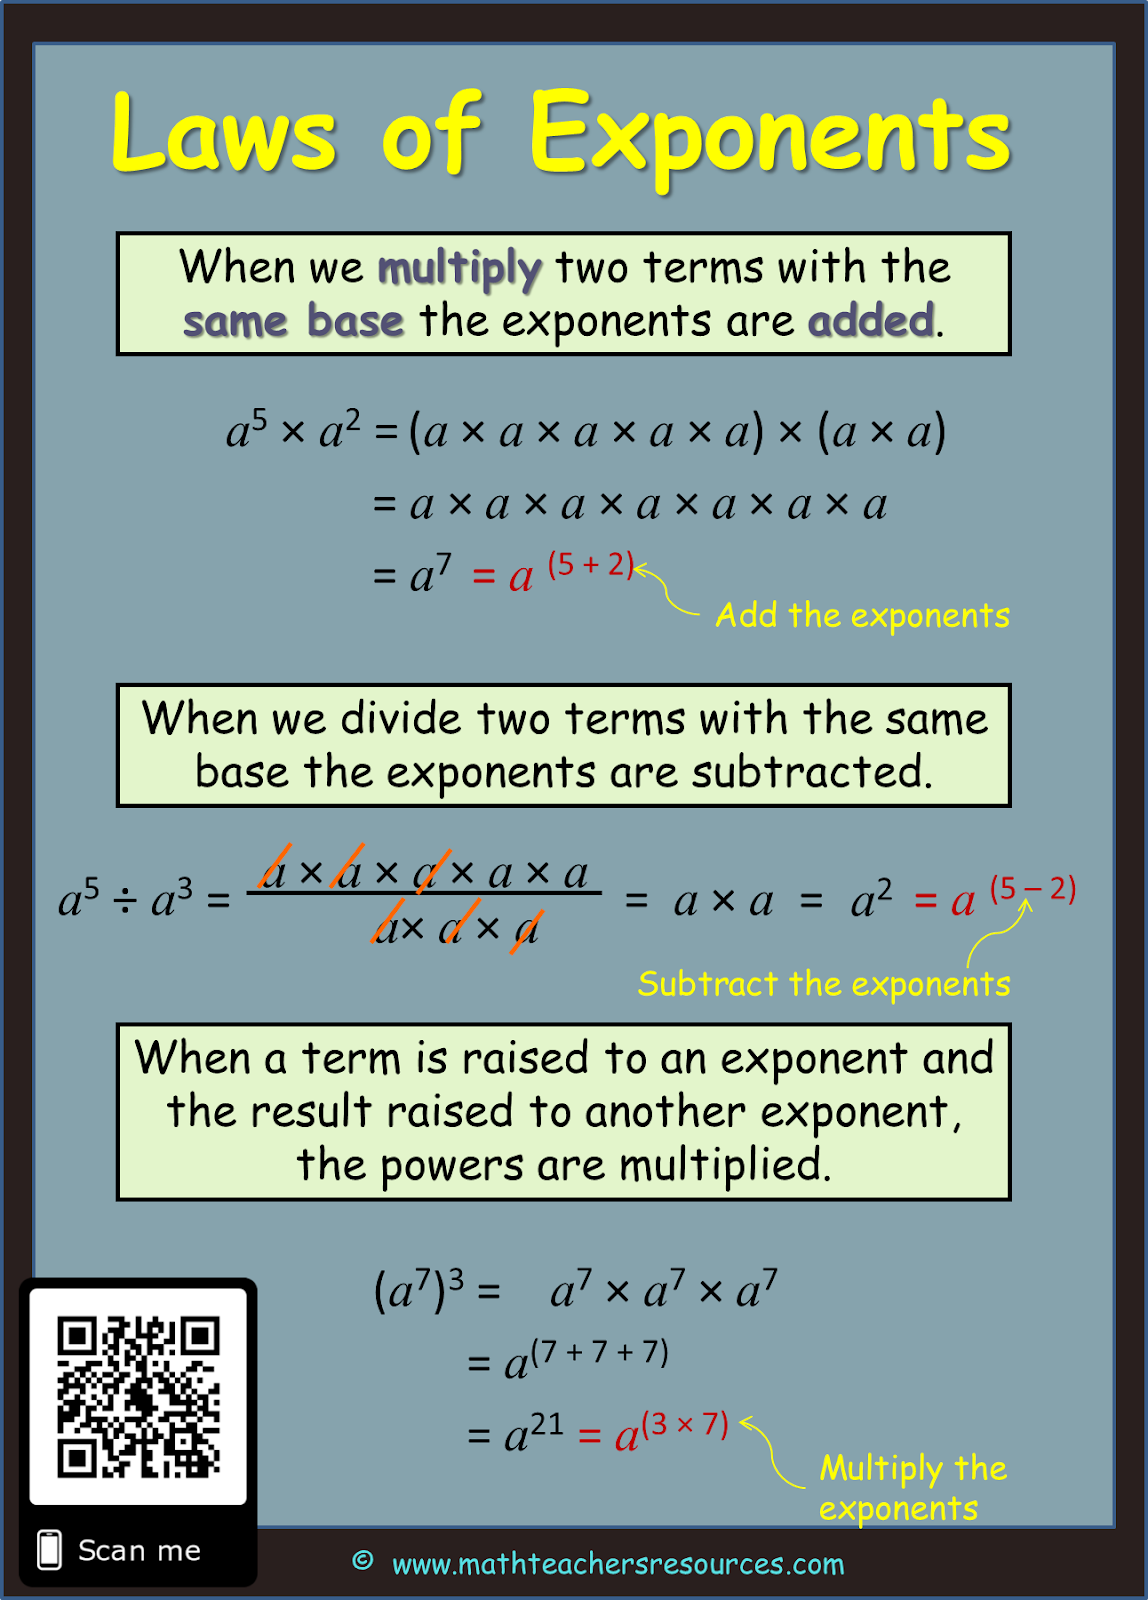 Rules of Exponents ~ TenTors Math Teacher Resources